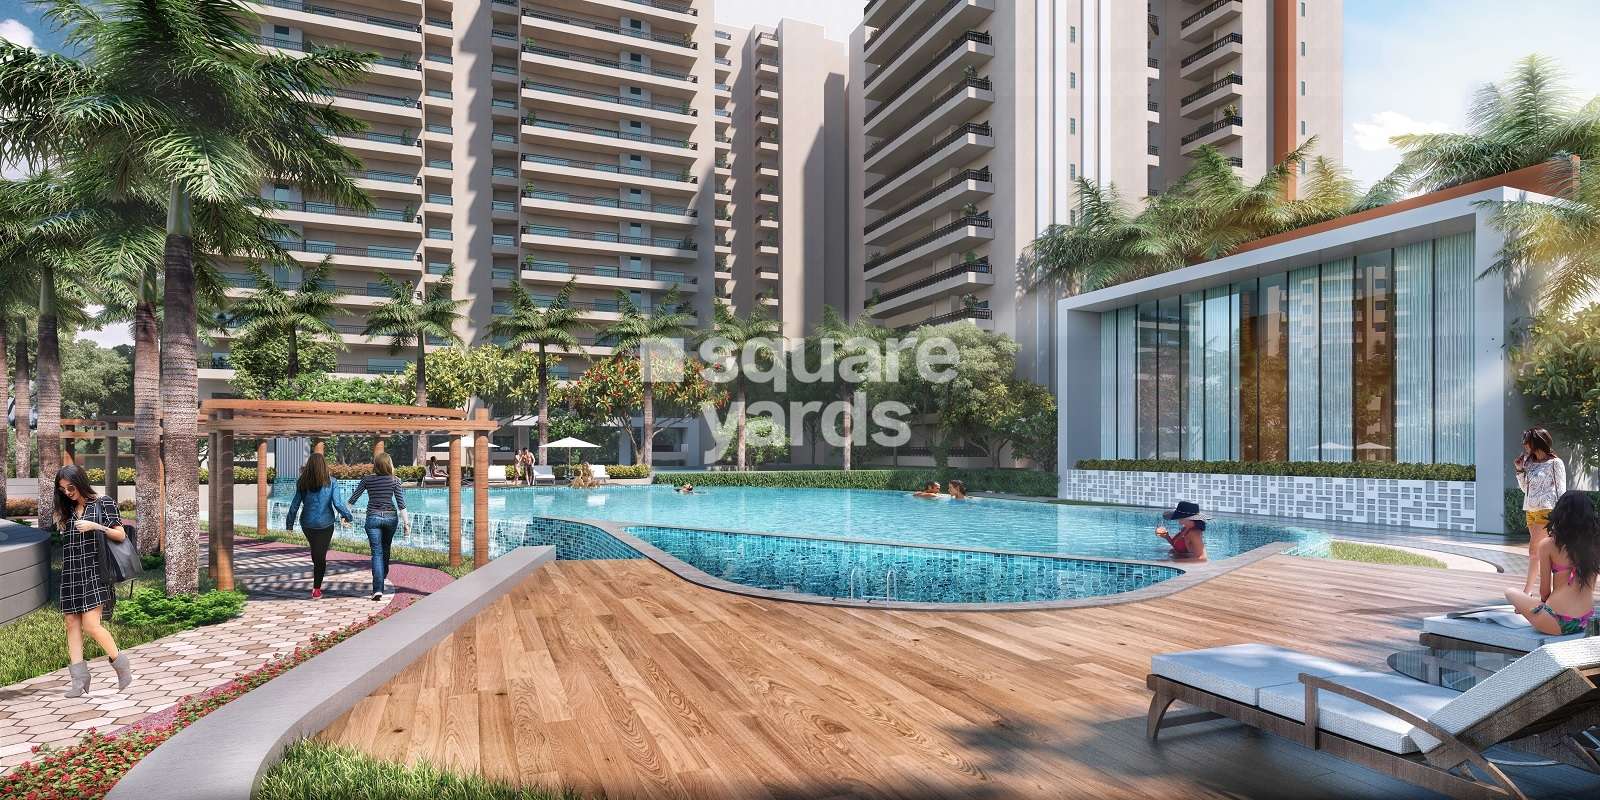 oasis grandstand project amenities features1 3547